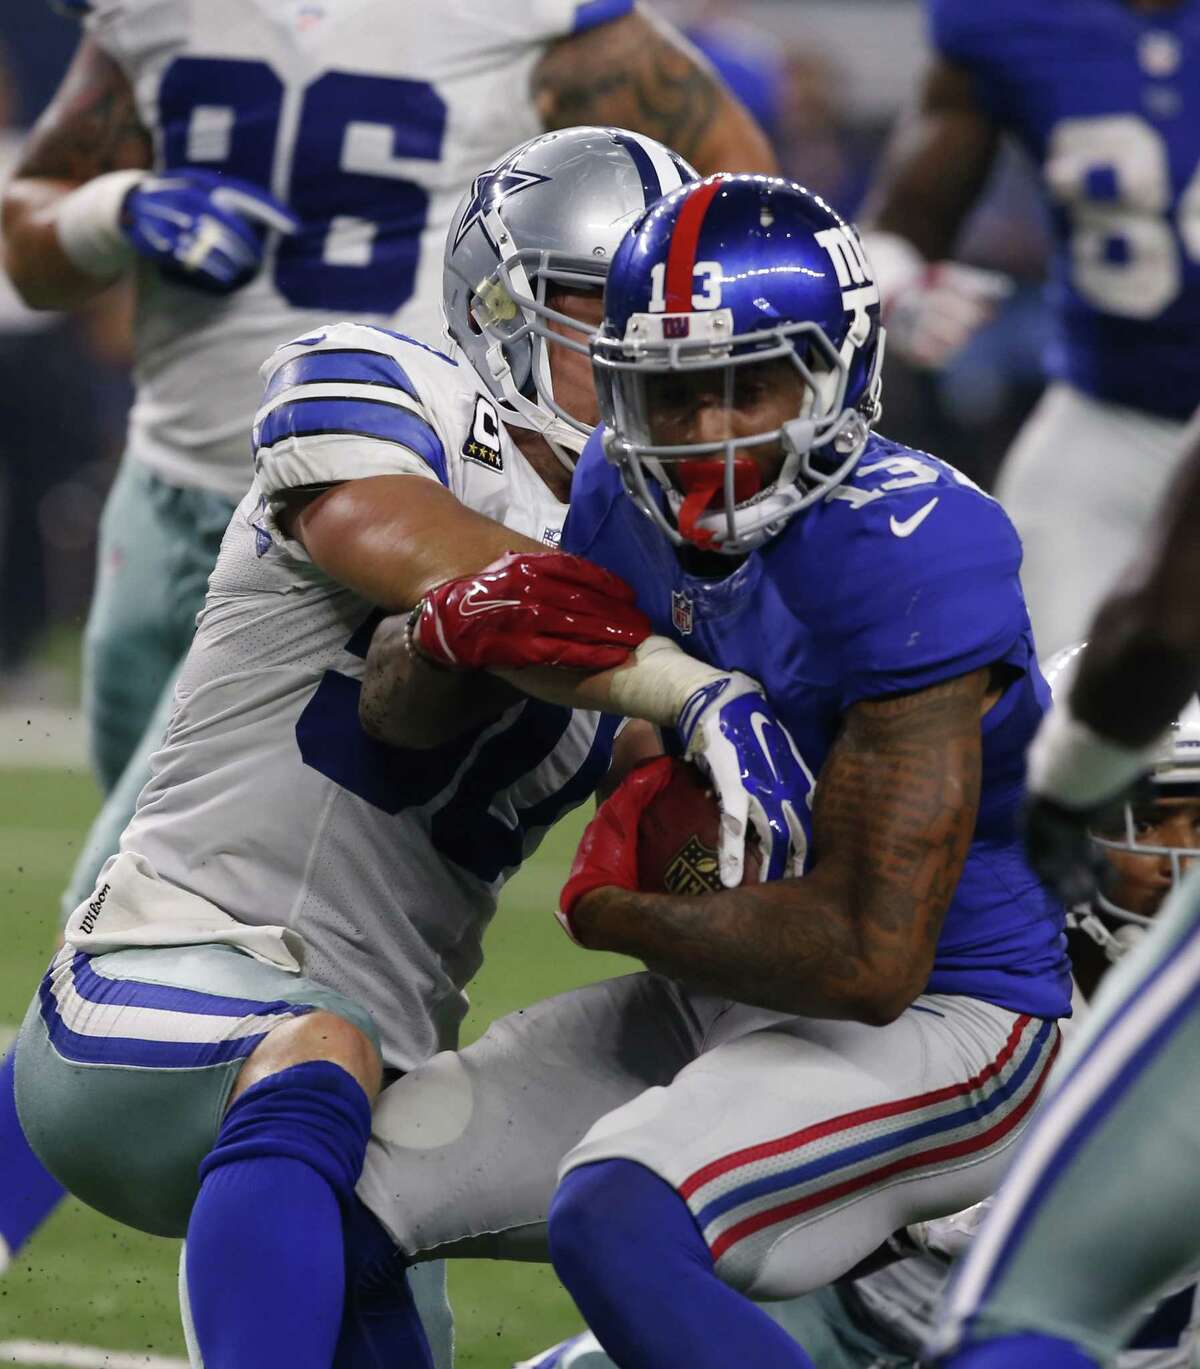 New York Giants receiver Odell Beckham is tackled by Dallas Cowboys linebacker Sean Lee during Sunday night’s game in Arlington, Texas.